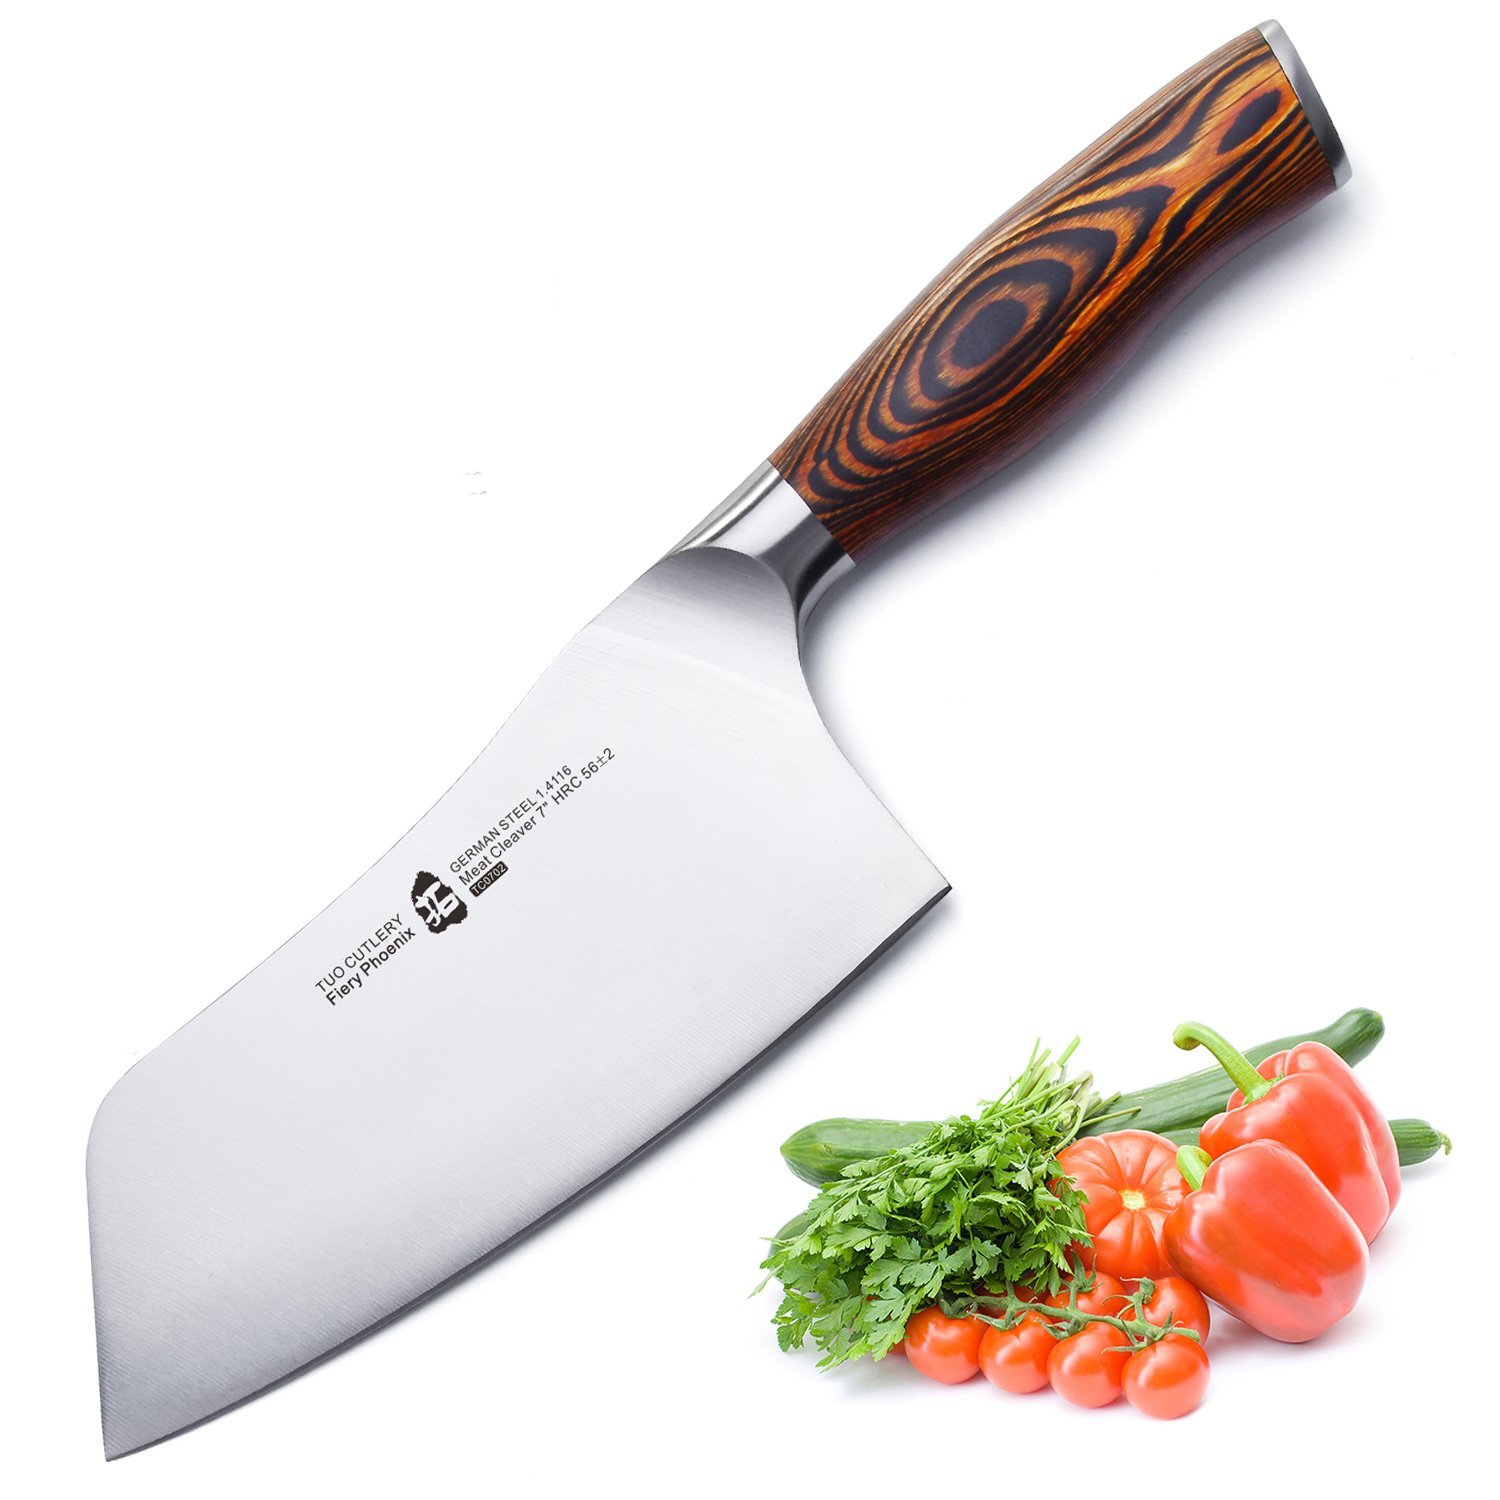 Amazon.com: TUO Cutlery Vegetable Meat Cleaver Knife 7